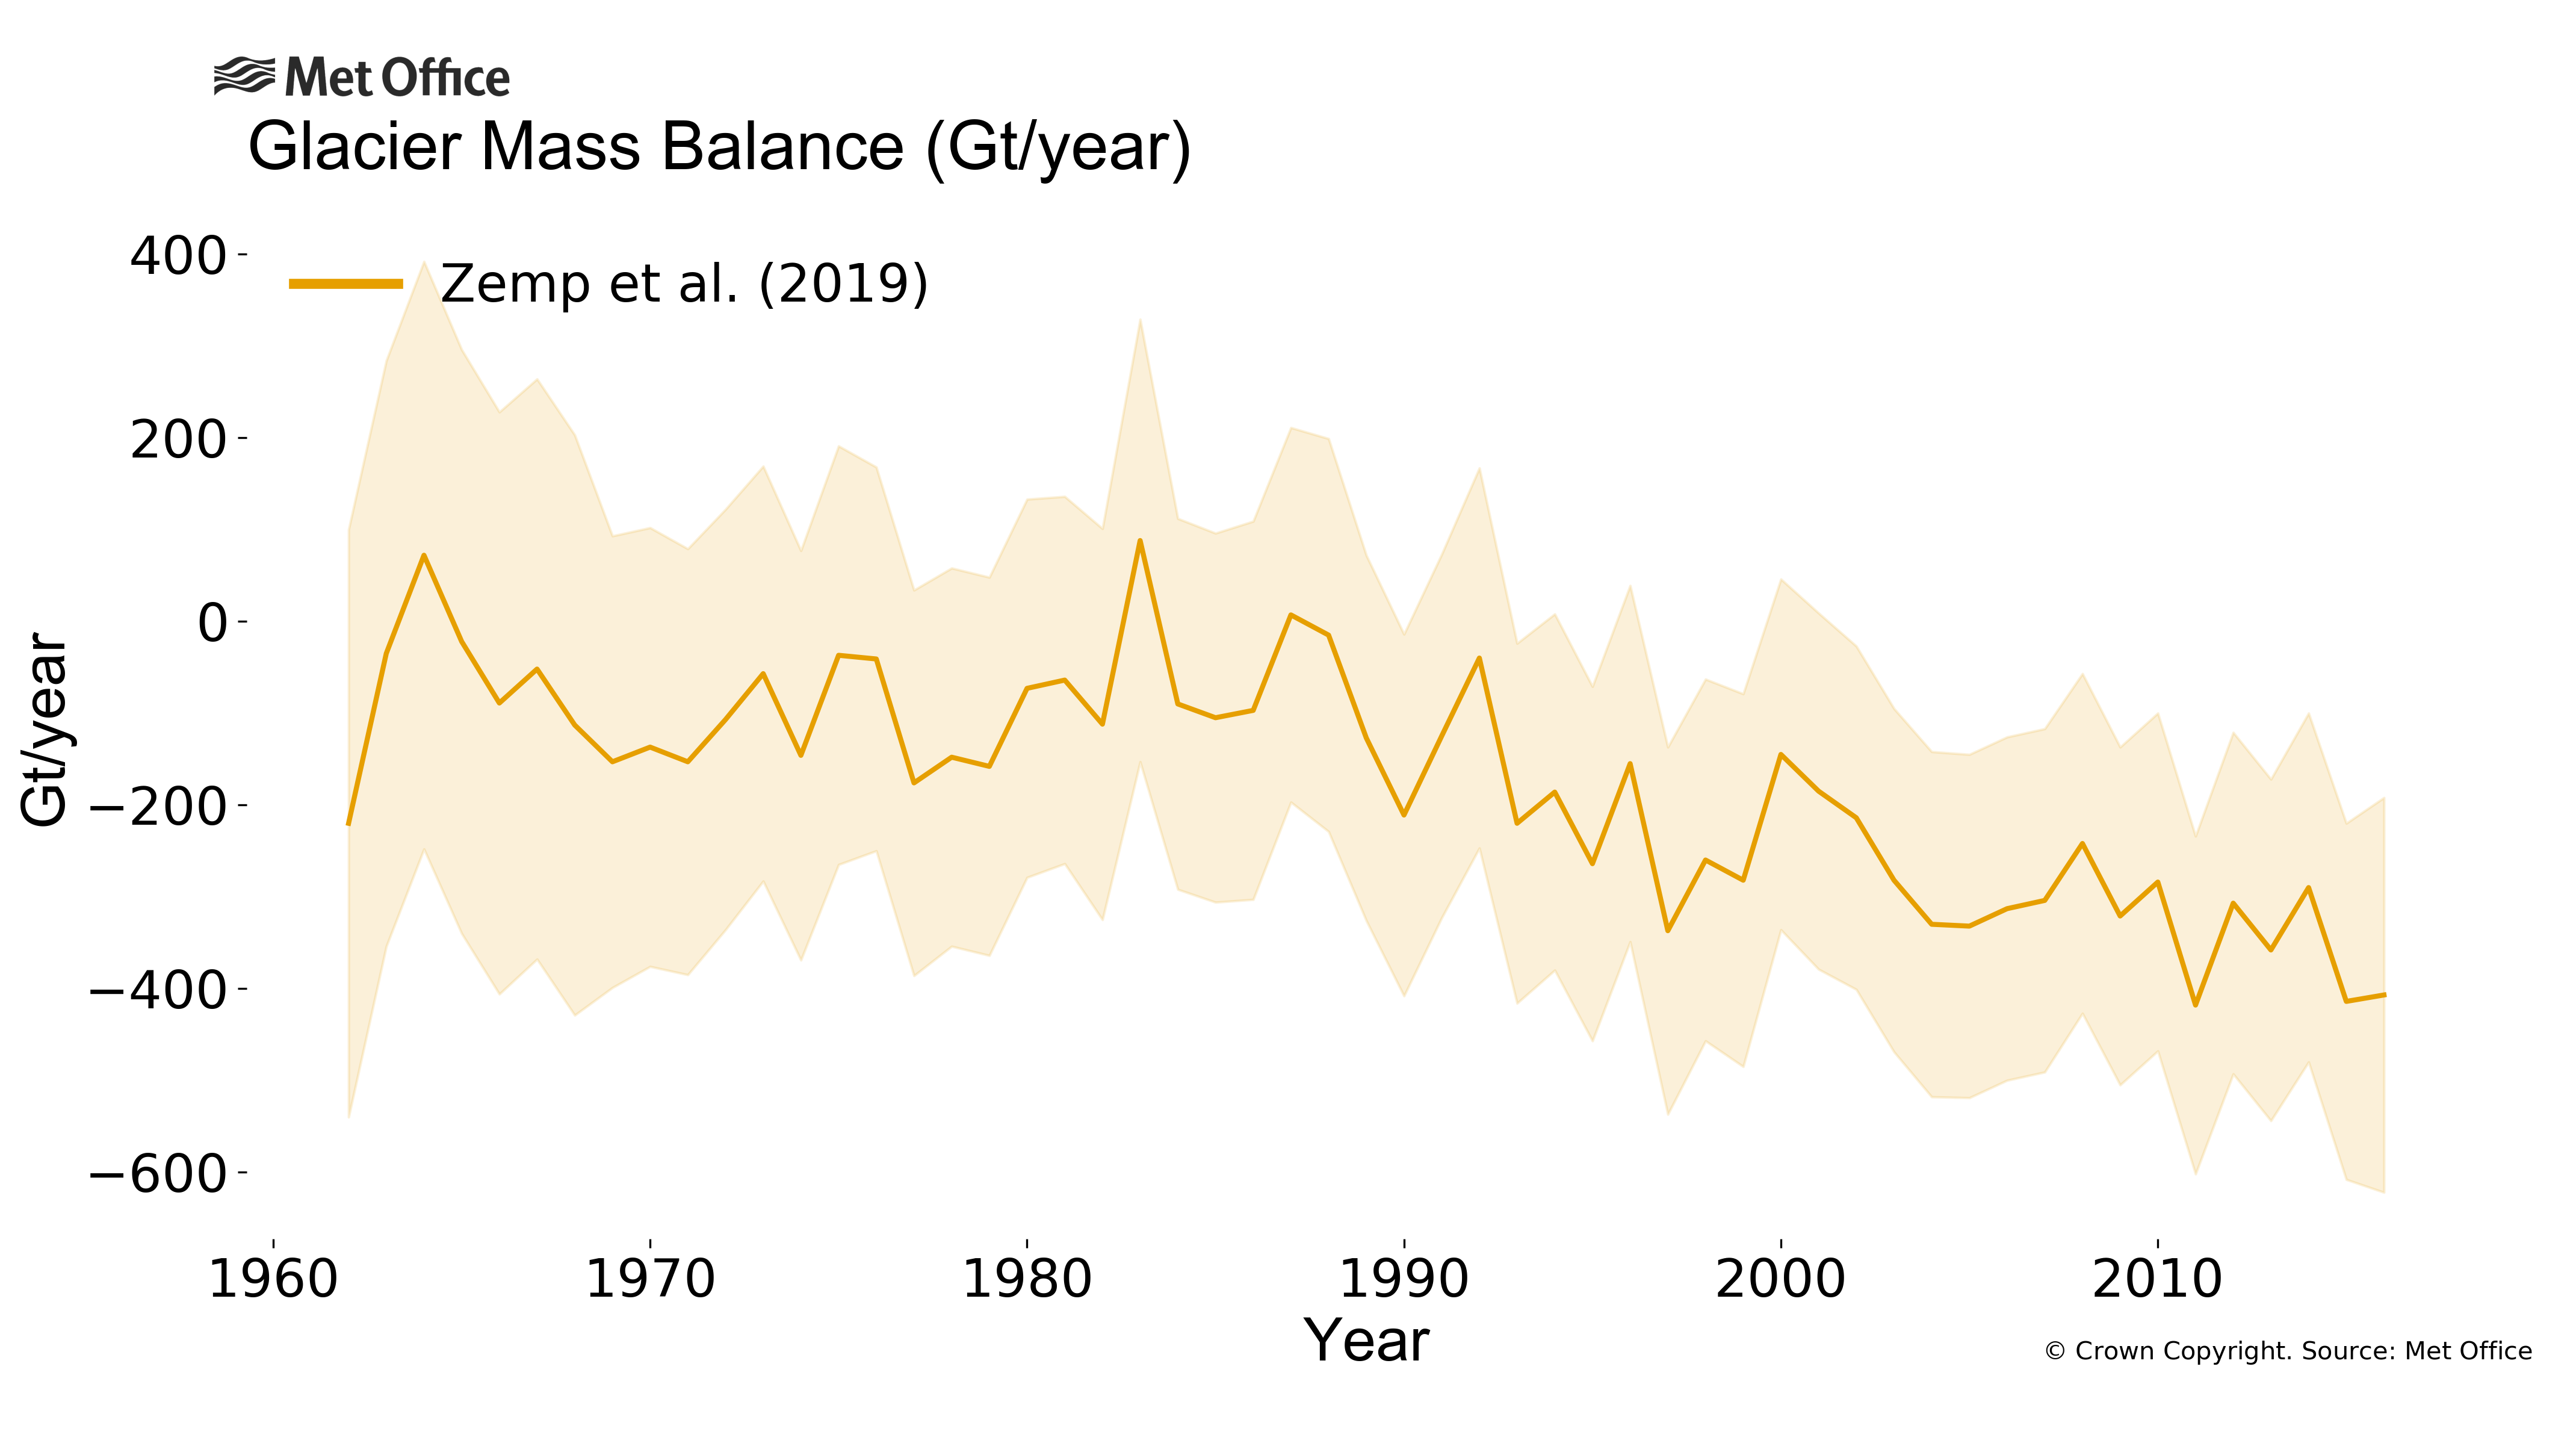 
Annual mass balance estimated for glaciers globally.
